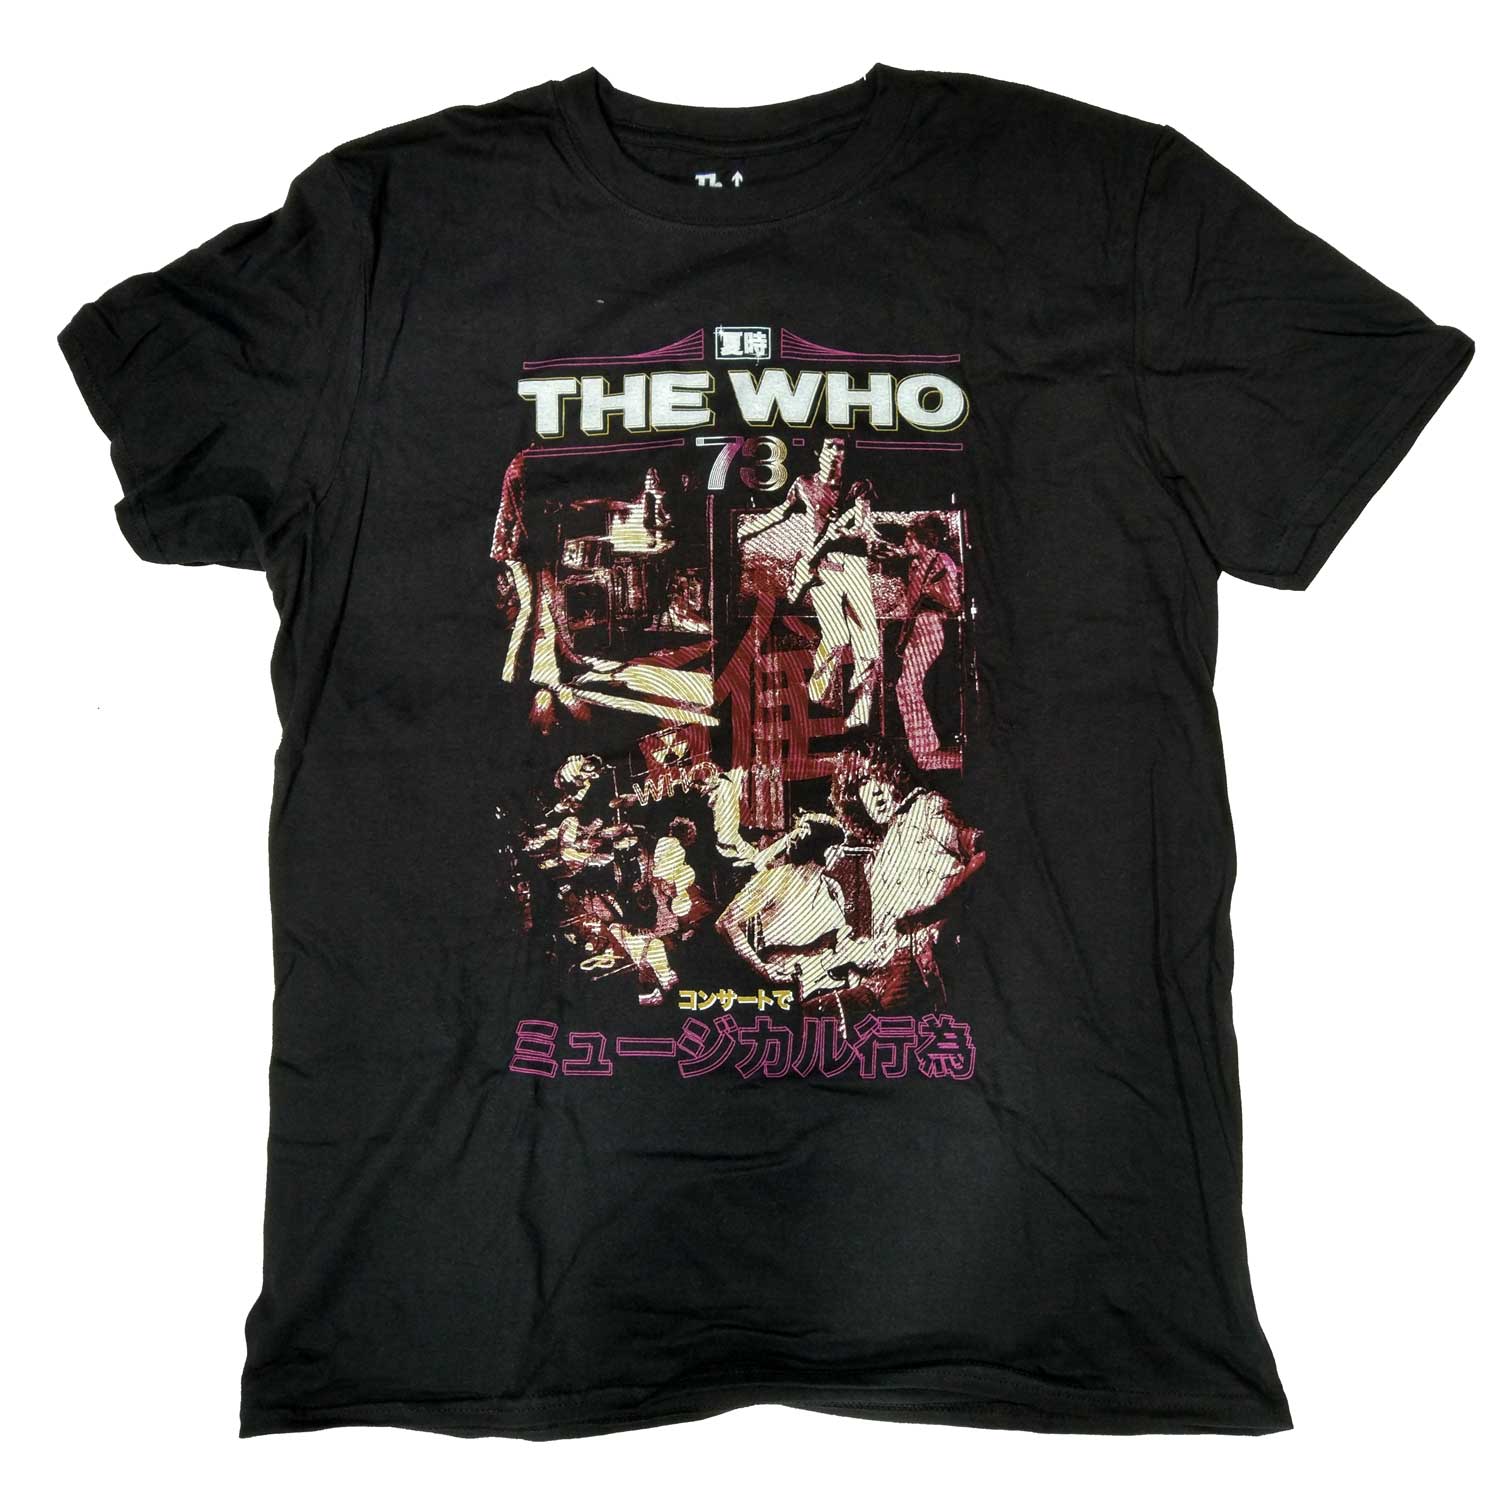 The Who T Shirt - Japan 73 Retro Design 100% Official Licensed